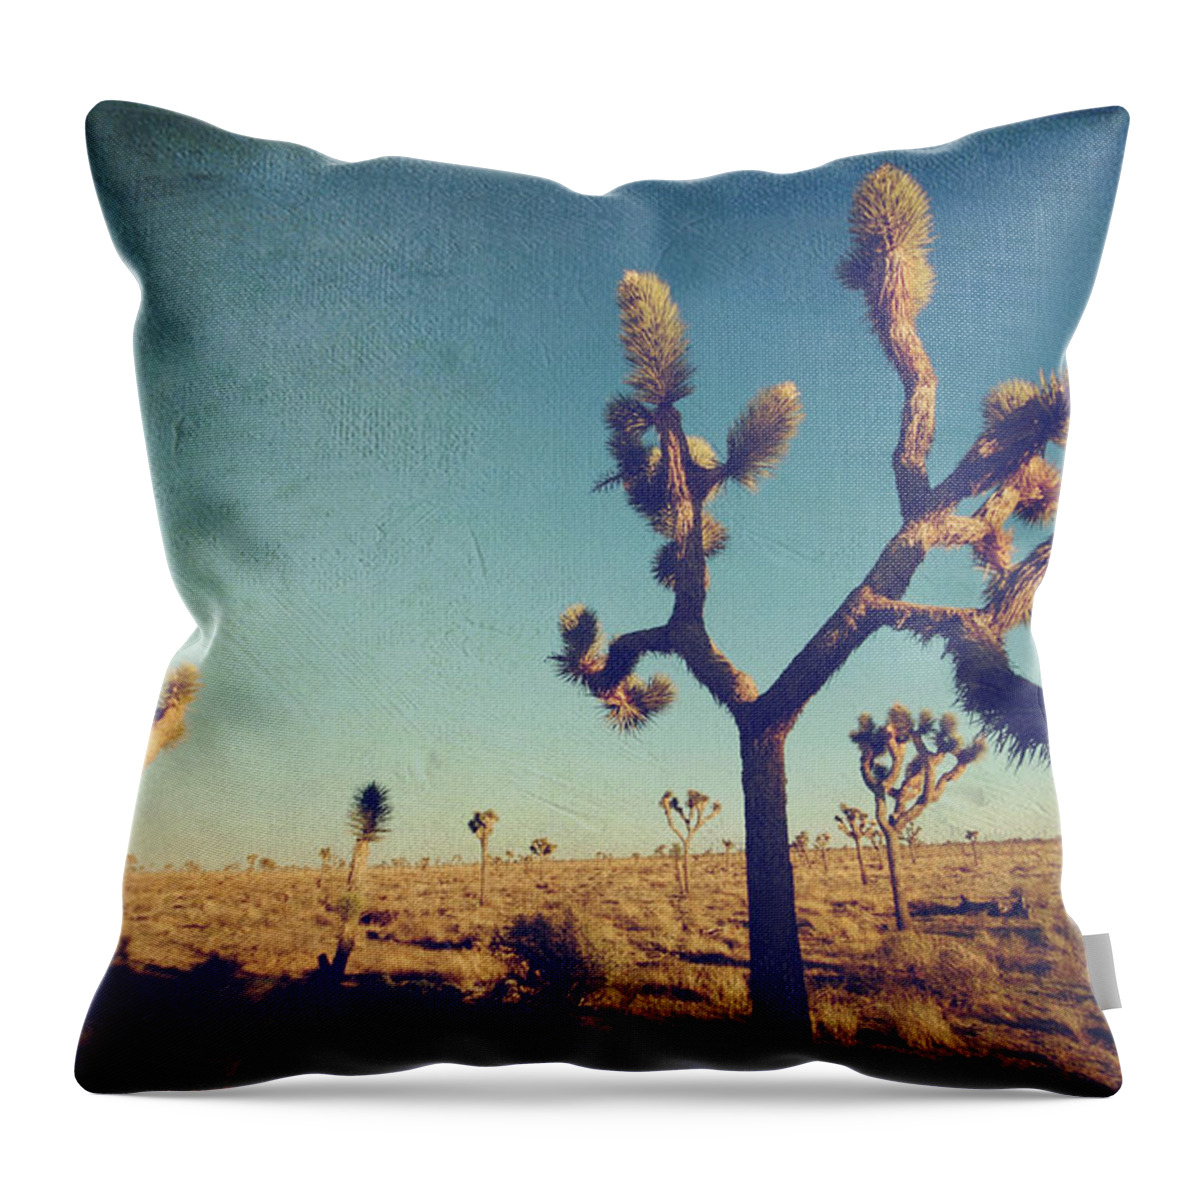 #faatoppicks Throw Pillow featuring the photograph Yes I'm Still Running by Laurie Search